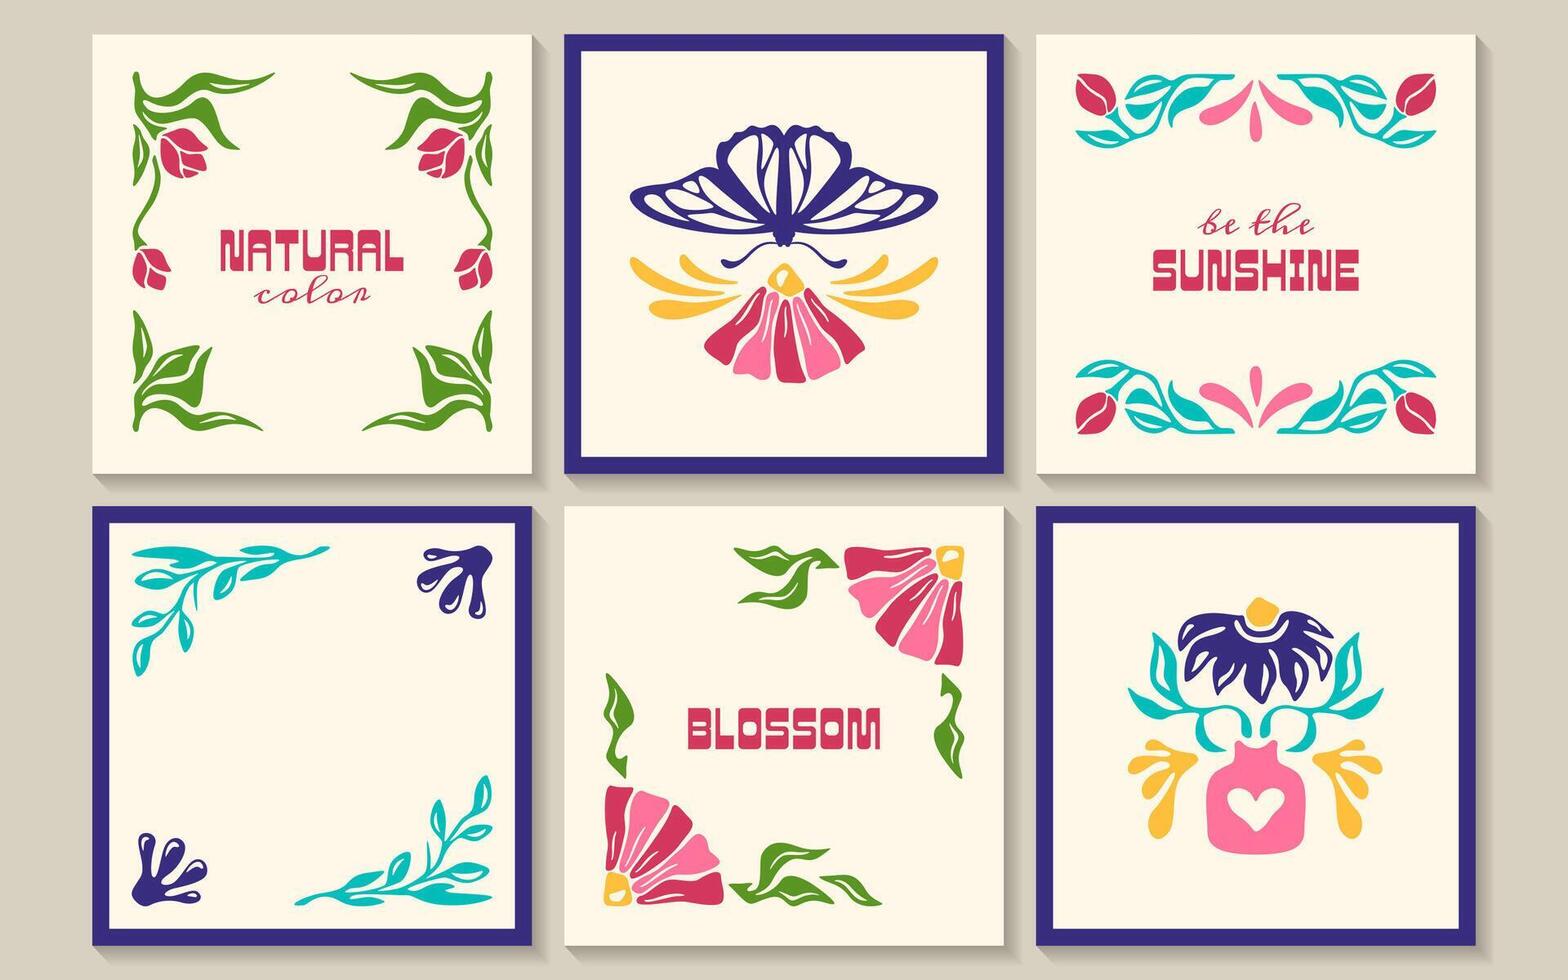 Groovy square posters with groovy butterfly, flowers in vase, botanical elements in matisse style. Trendy banners with abstract blossom and contemporary organic plants. Modern naive interior frames vector